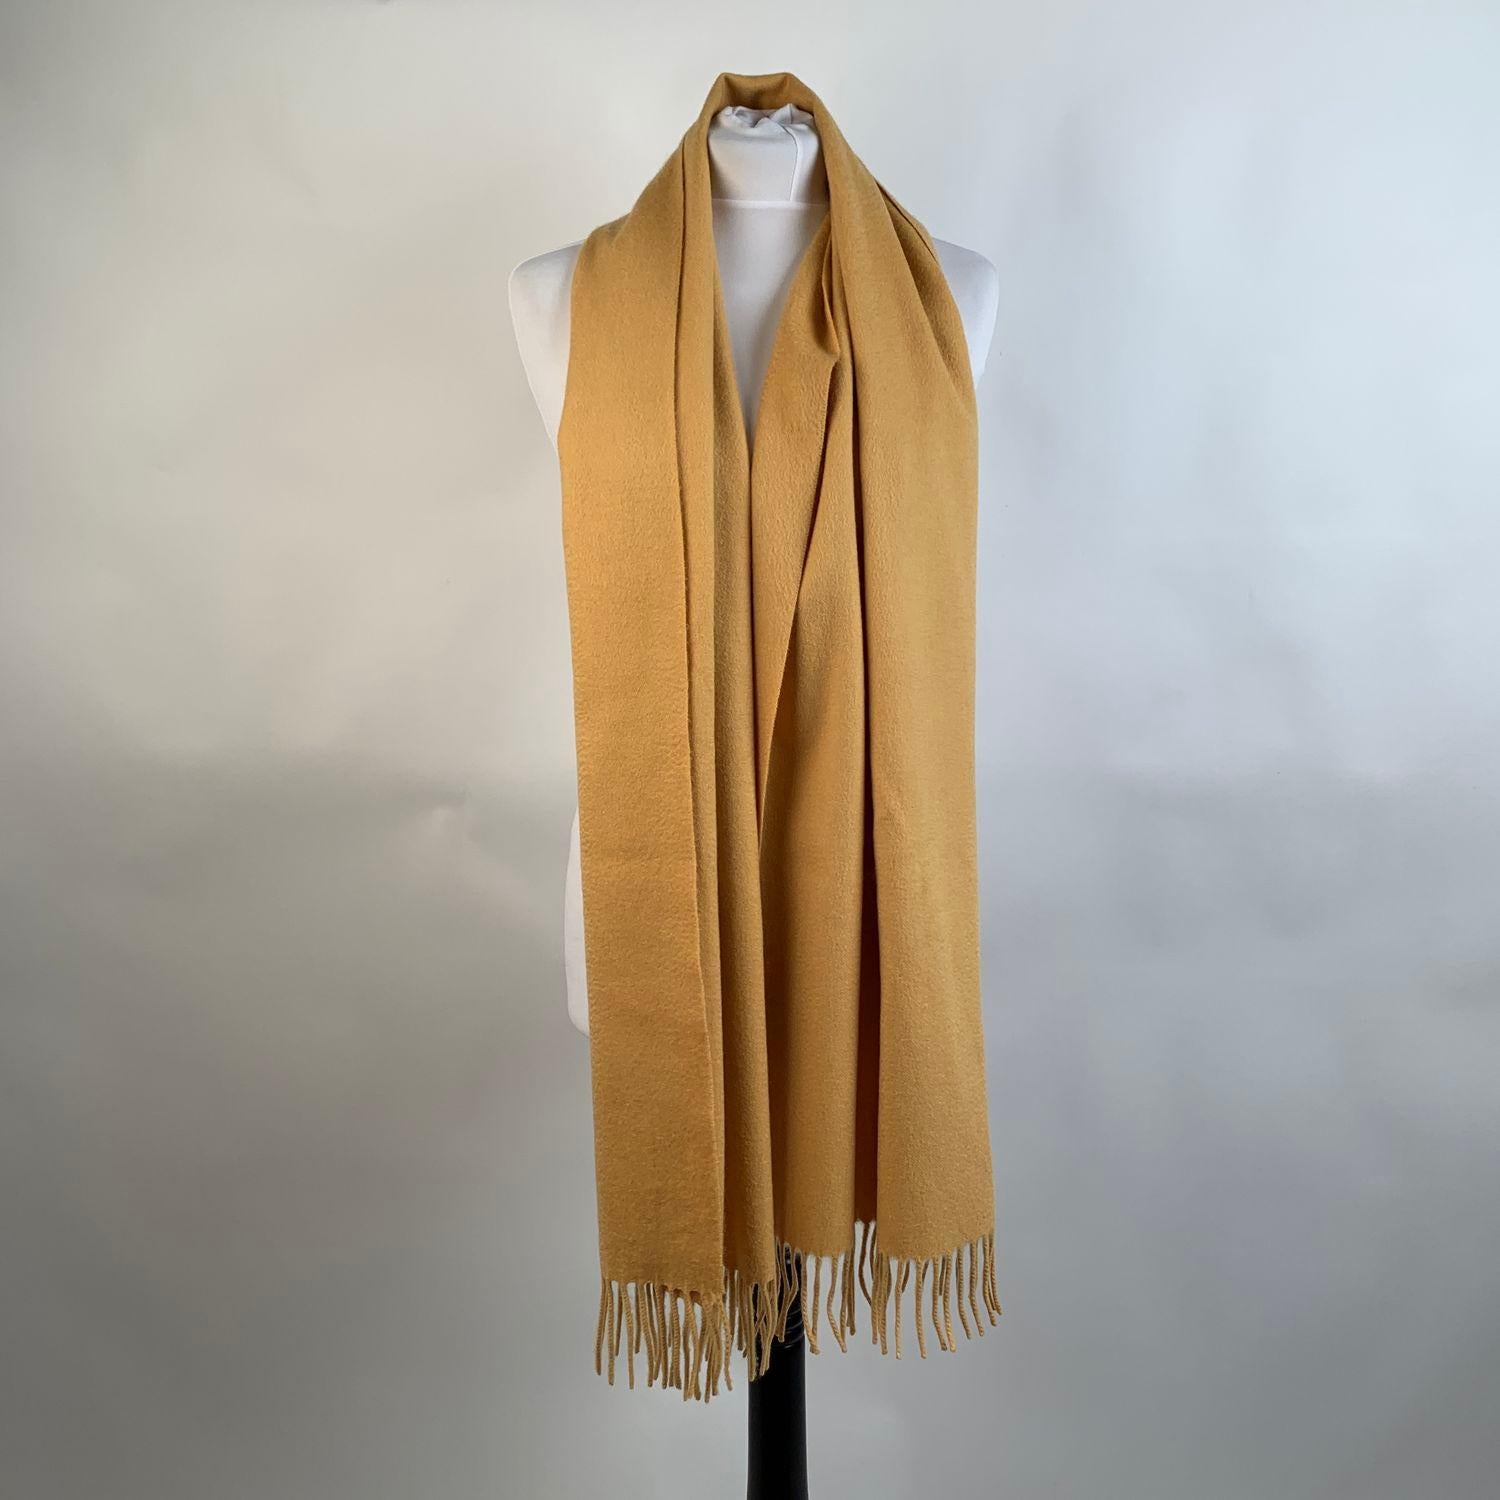 Vintage Loro Piana cashmere large scarf in yellow color. Fringed hem. Composition: 100% cashmere. Made in Italy. Width: 17 inches - 43, 2 cm - Lenght: 70 inches - 177,7 cm




Details

MATERIAL: Cashmere

COLOR: Yellow

MODEL: Scarf

GENDER: Women,